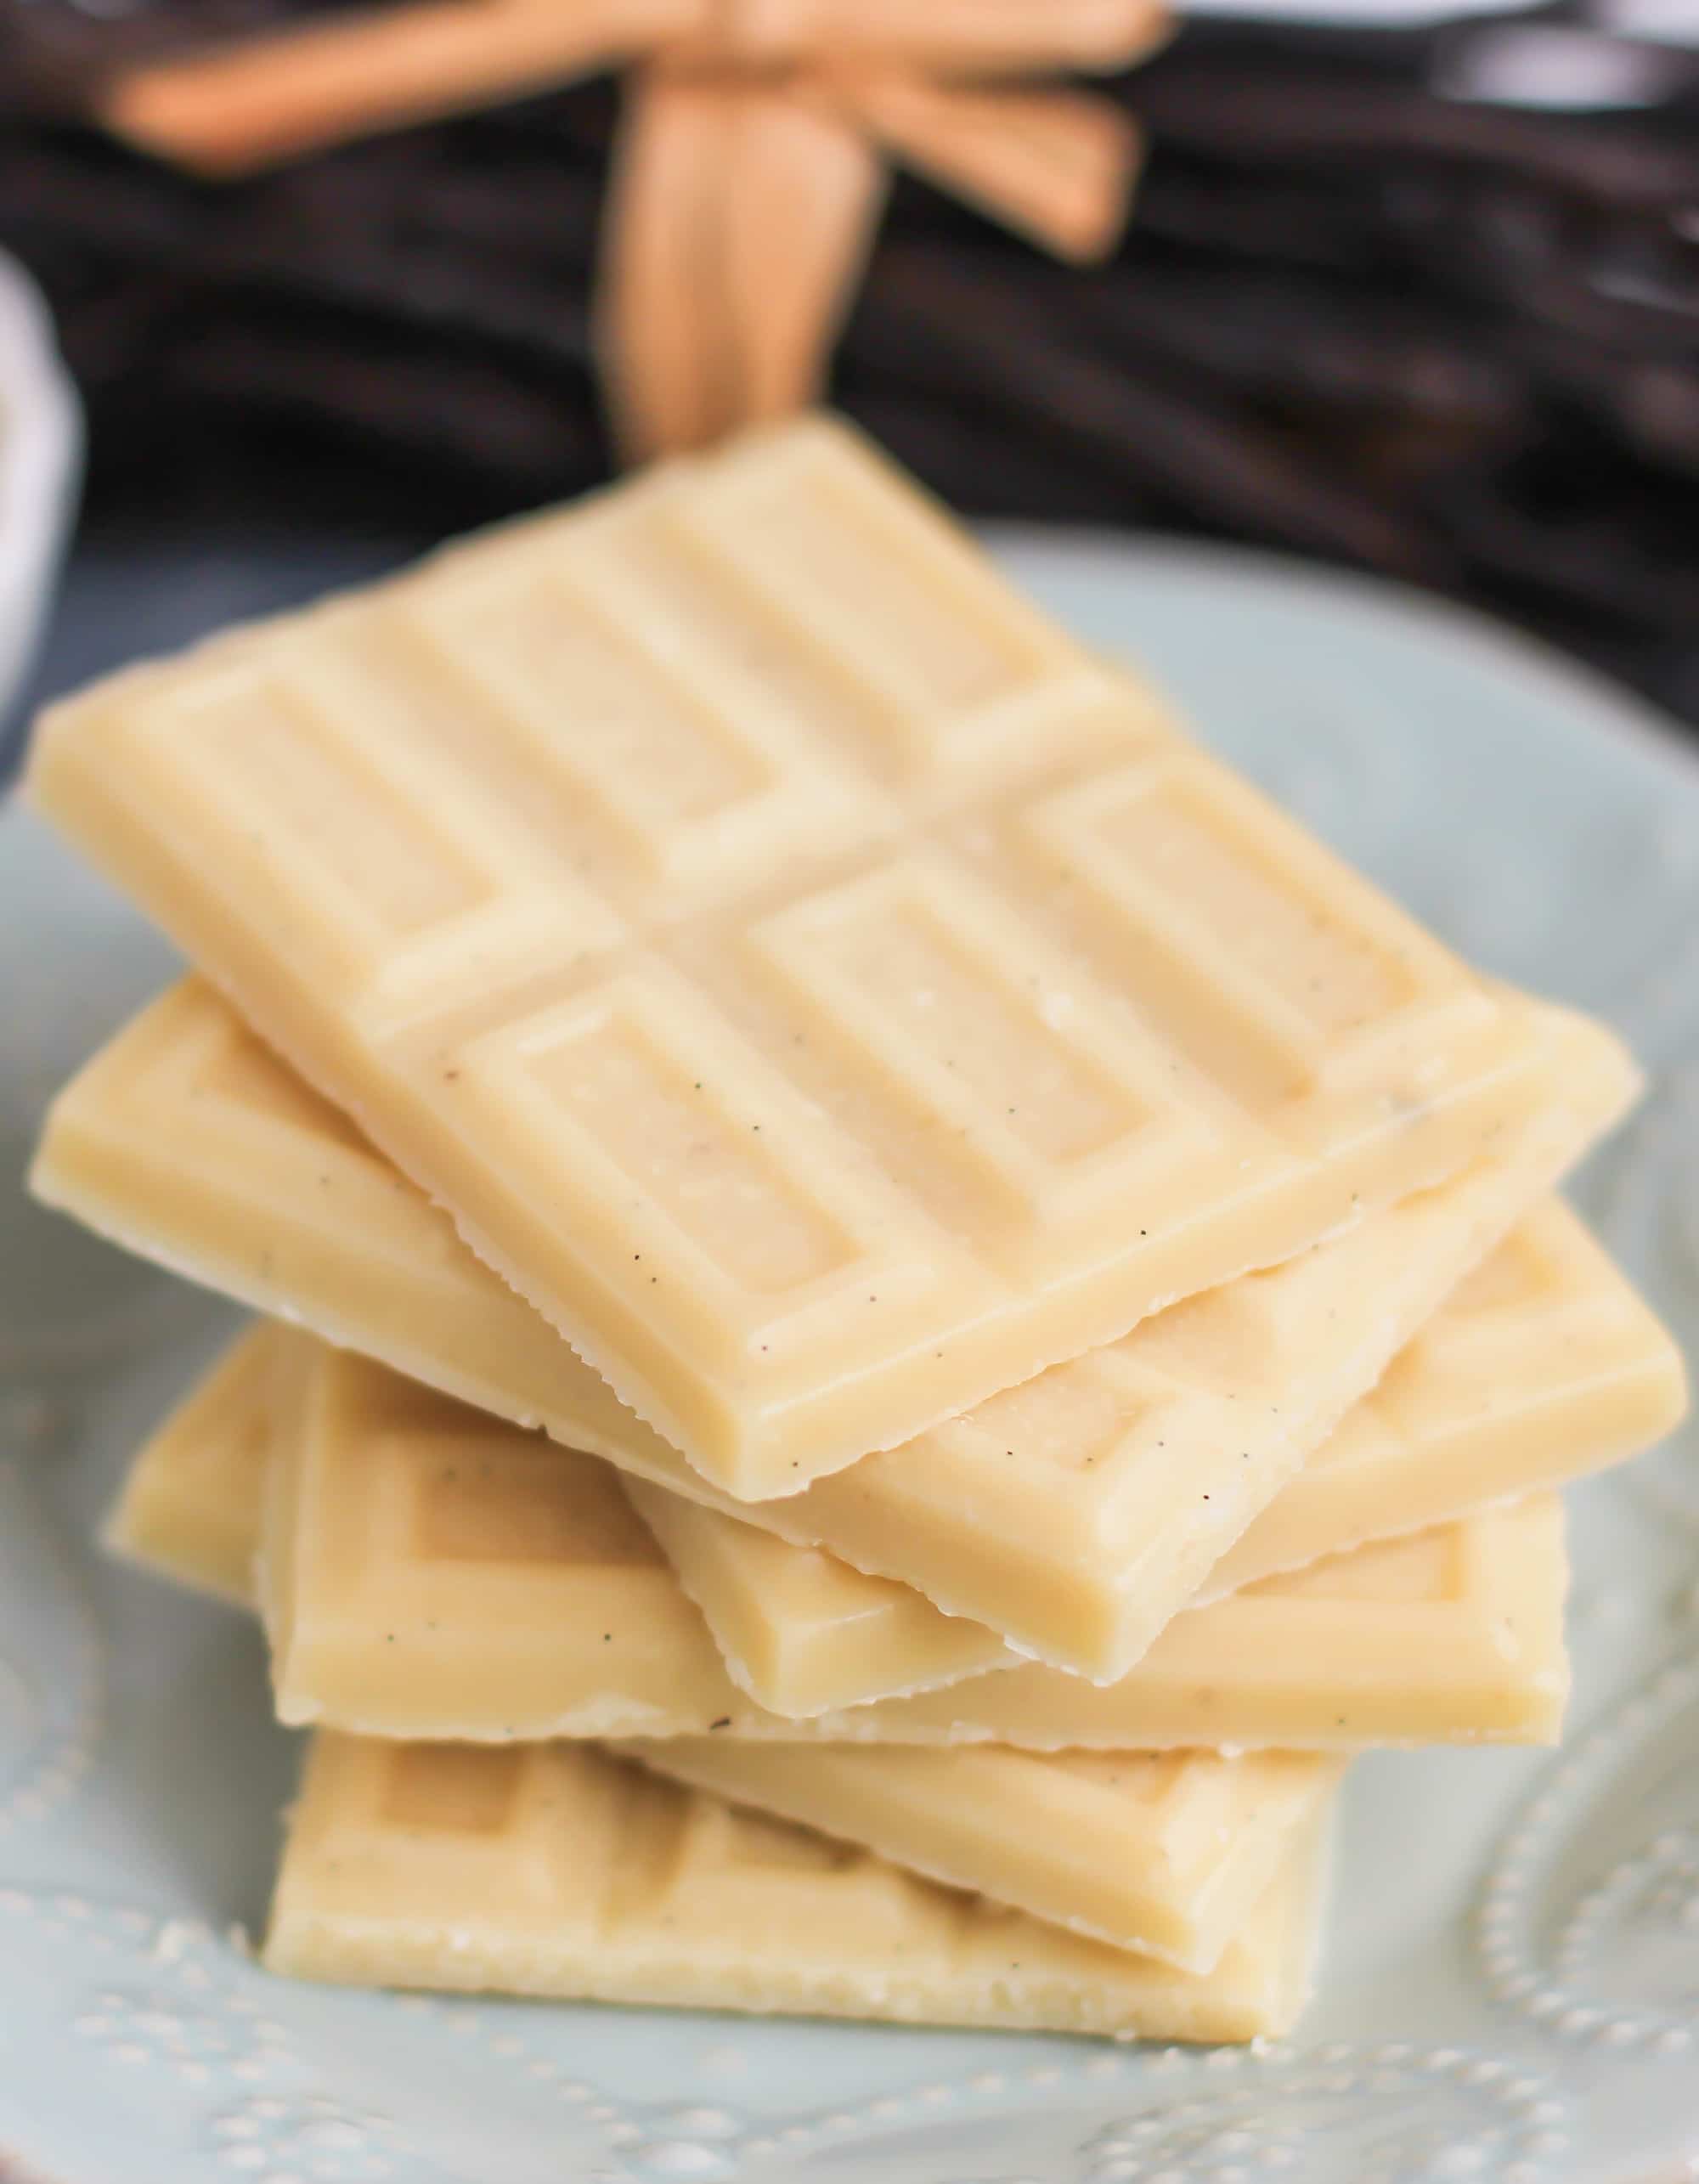 Healthy Homemade White Chocolate (refined sugar free, low carb, gluten free) - Healthy Dessert Recipes at Desserts with Benefits